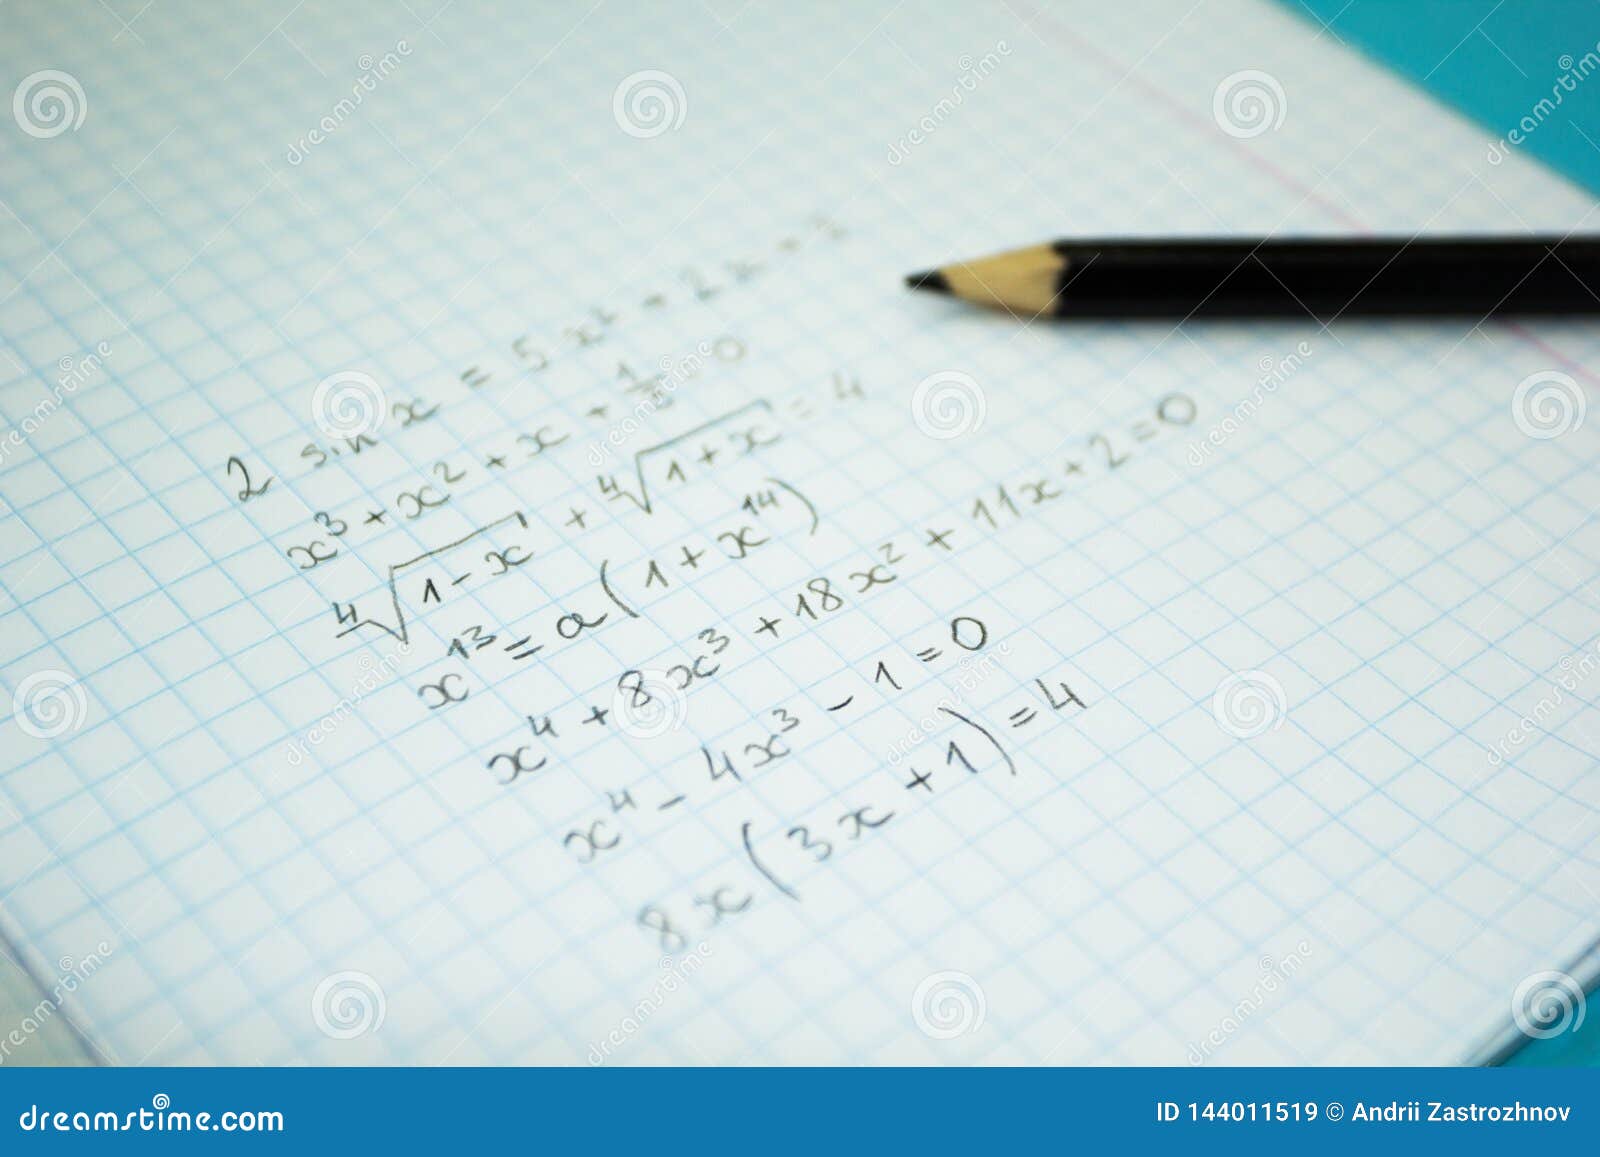 mathematical examples and calculations in a notebook for lectures